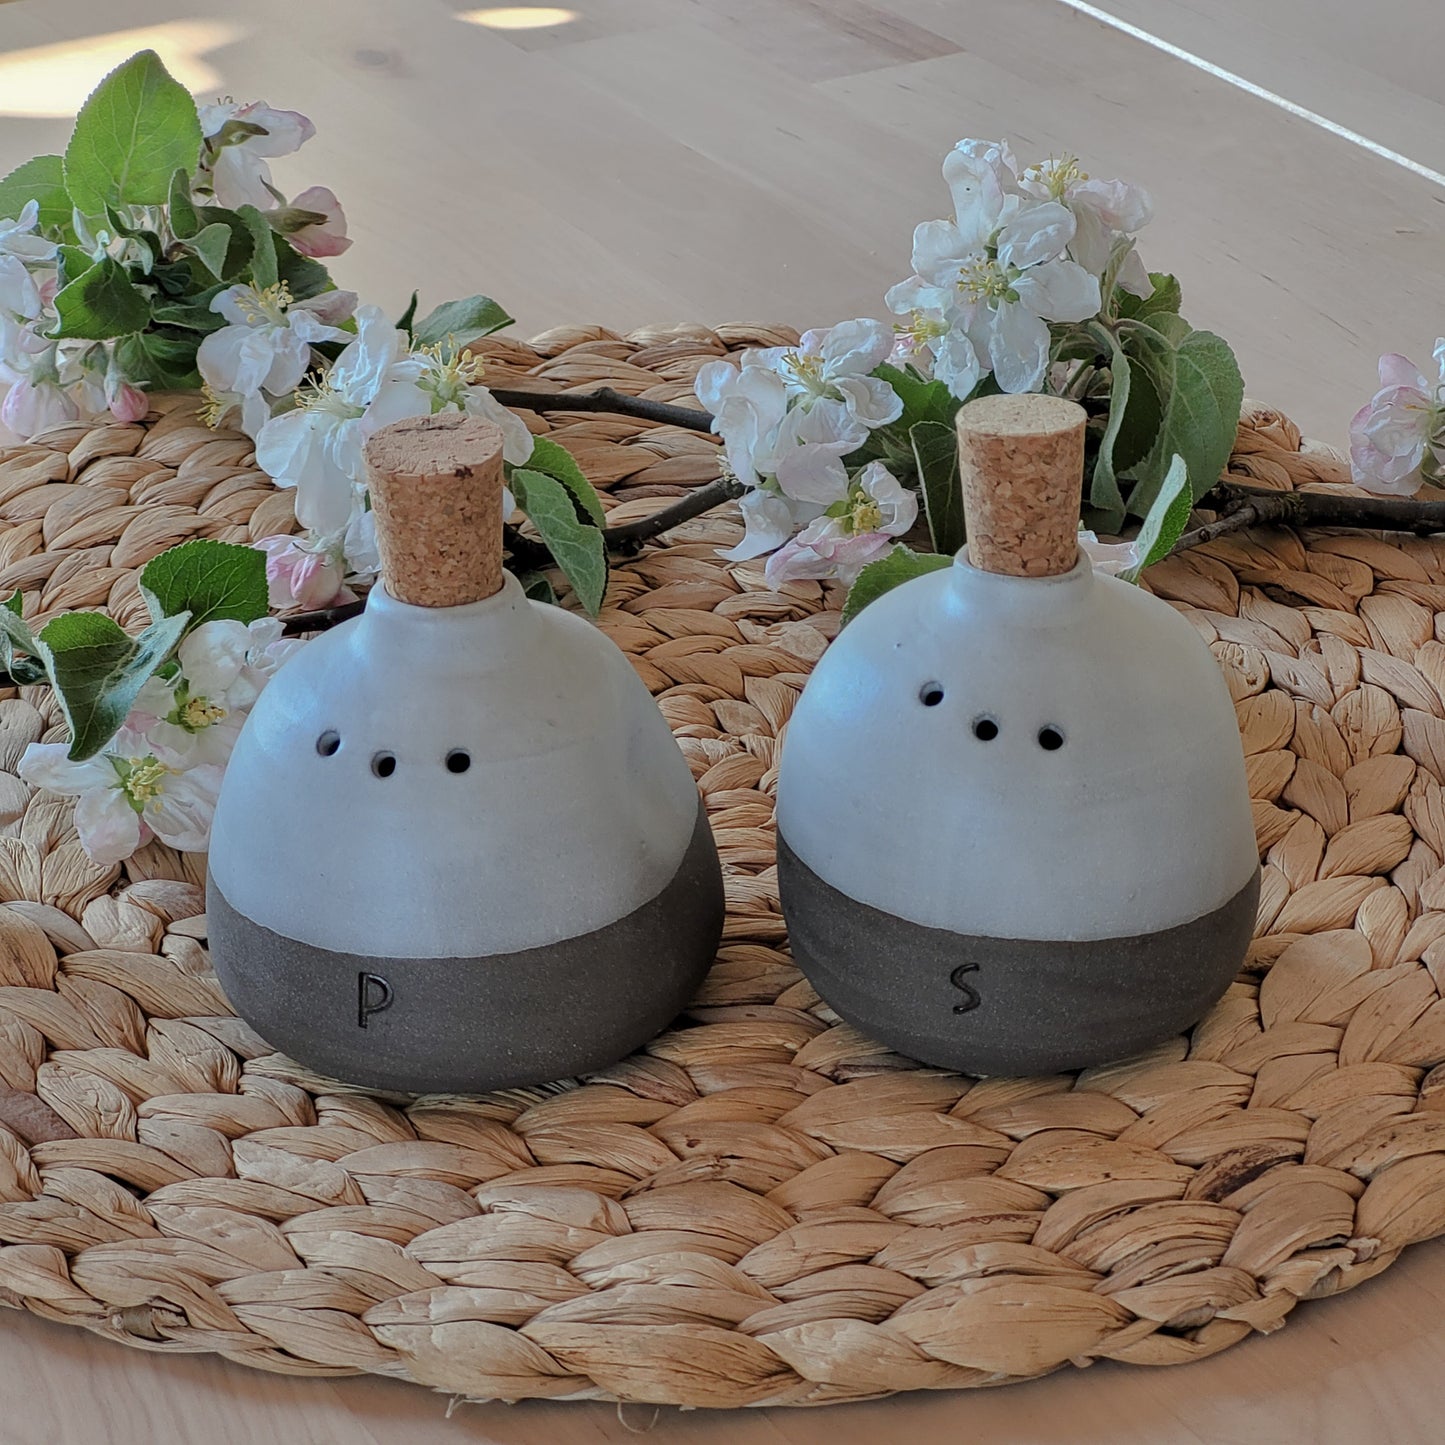  A unique handmade housewarming gift. This gray pottery salt and pepper shaker set is handcrafted, glazed and fired with lead-free glaze.